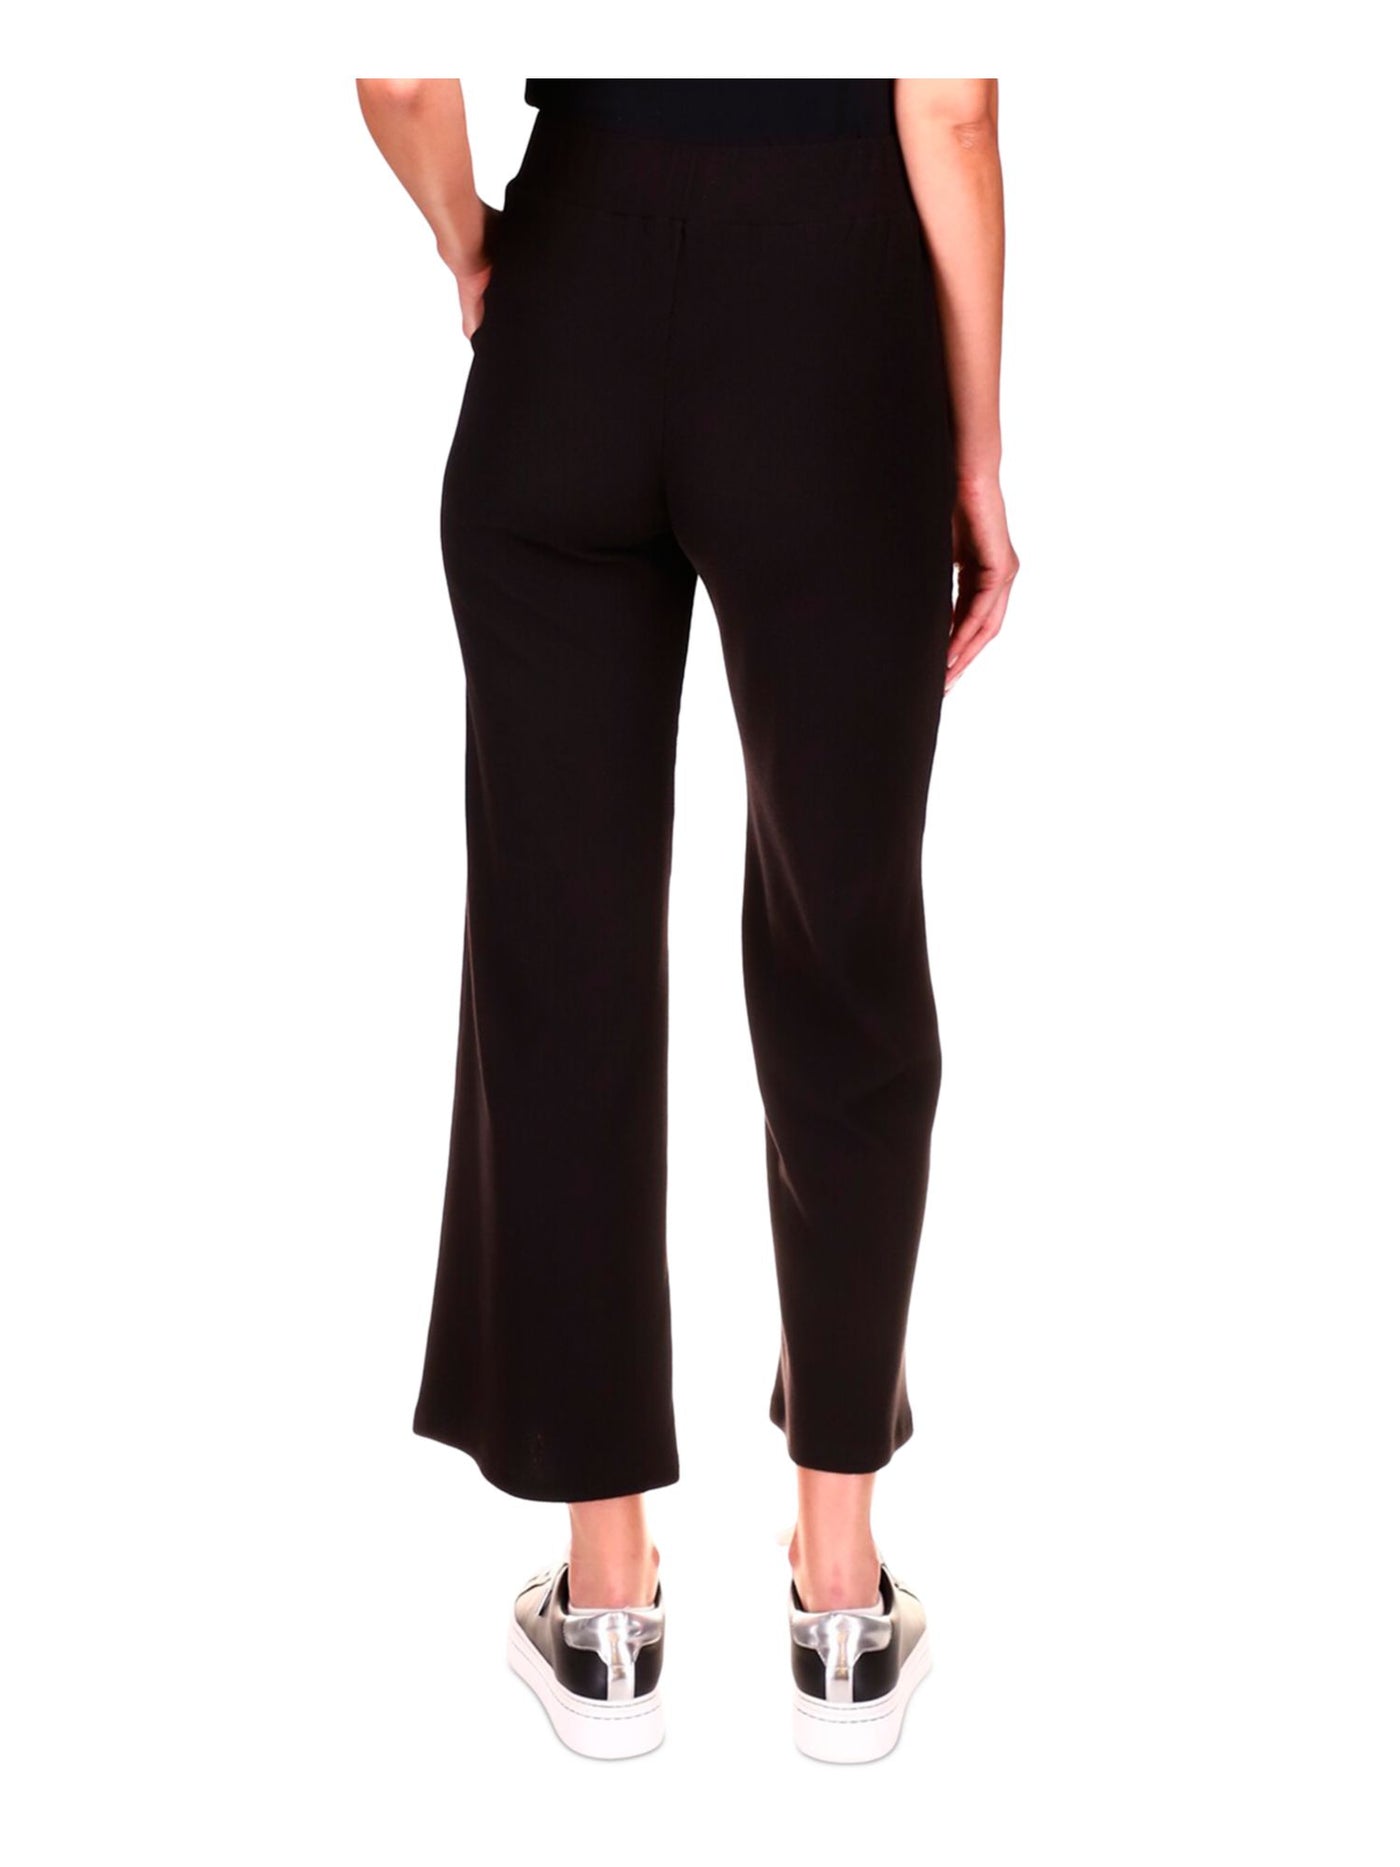 MICHAEL KORS Womens Black Ribbed Pocketed Pull-on Kick-flare Cropped Pants Petites P\XS